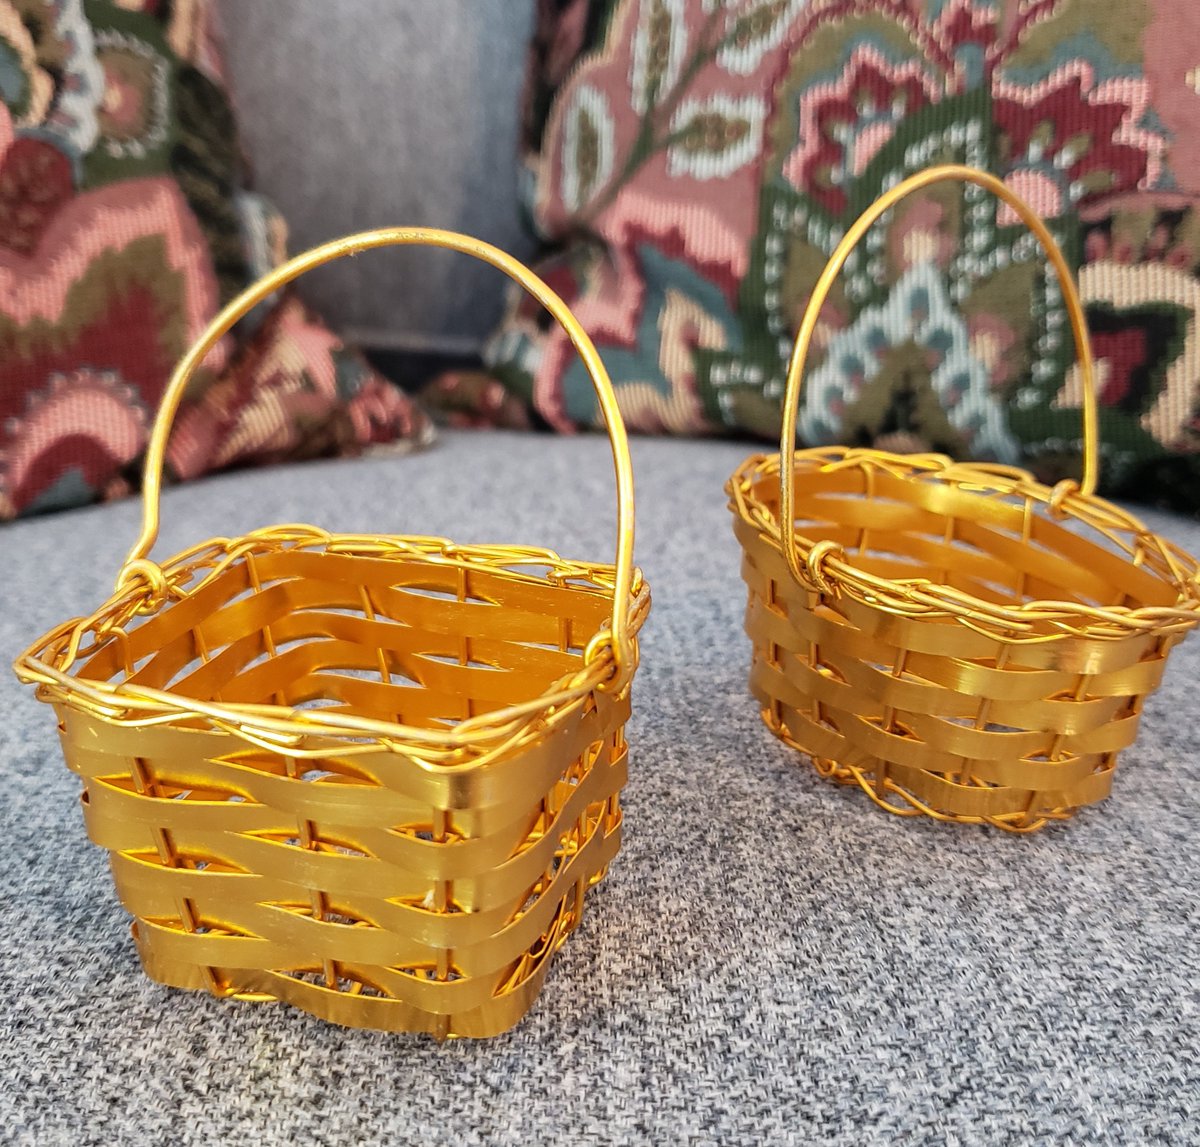 Excited to share the latest addition to my #etsy shop: Mini Gold Wire Baskets - Set of TWO etsy.me/3lT4IDn #gold #kitchendining #metal  #giftbasket #basketcontainer #basketwithhandle #goldwirebasket #smallbasket #easterbasket #dazzlelace #dazzleparty